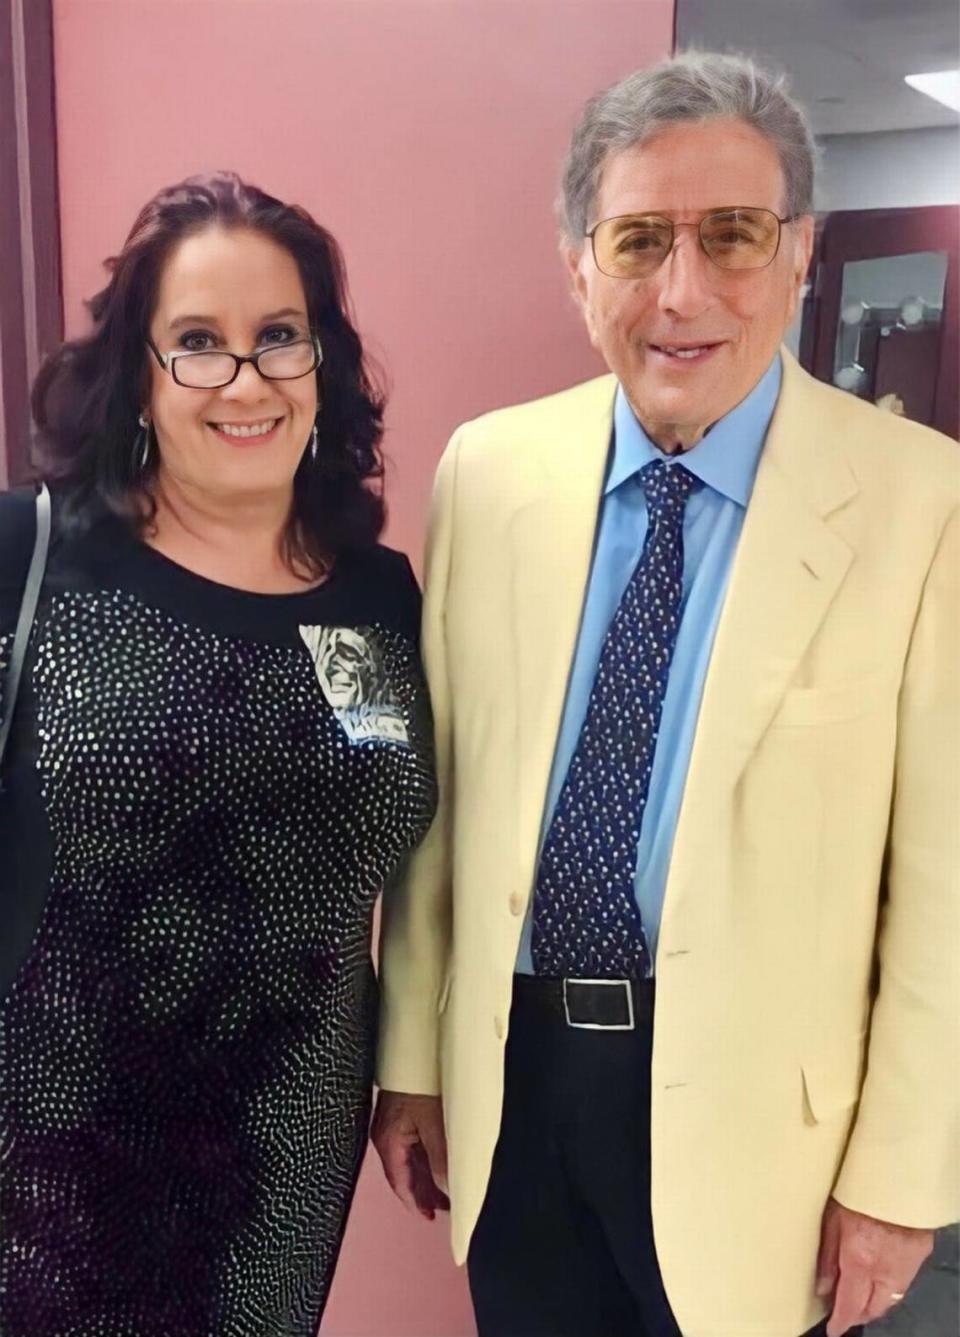 Cathy Mancuso and singer Tony Bennett backstage at a Bass Hall concert.